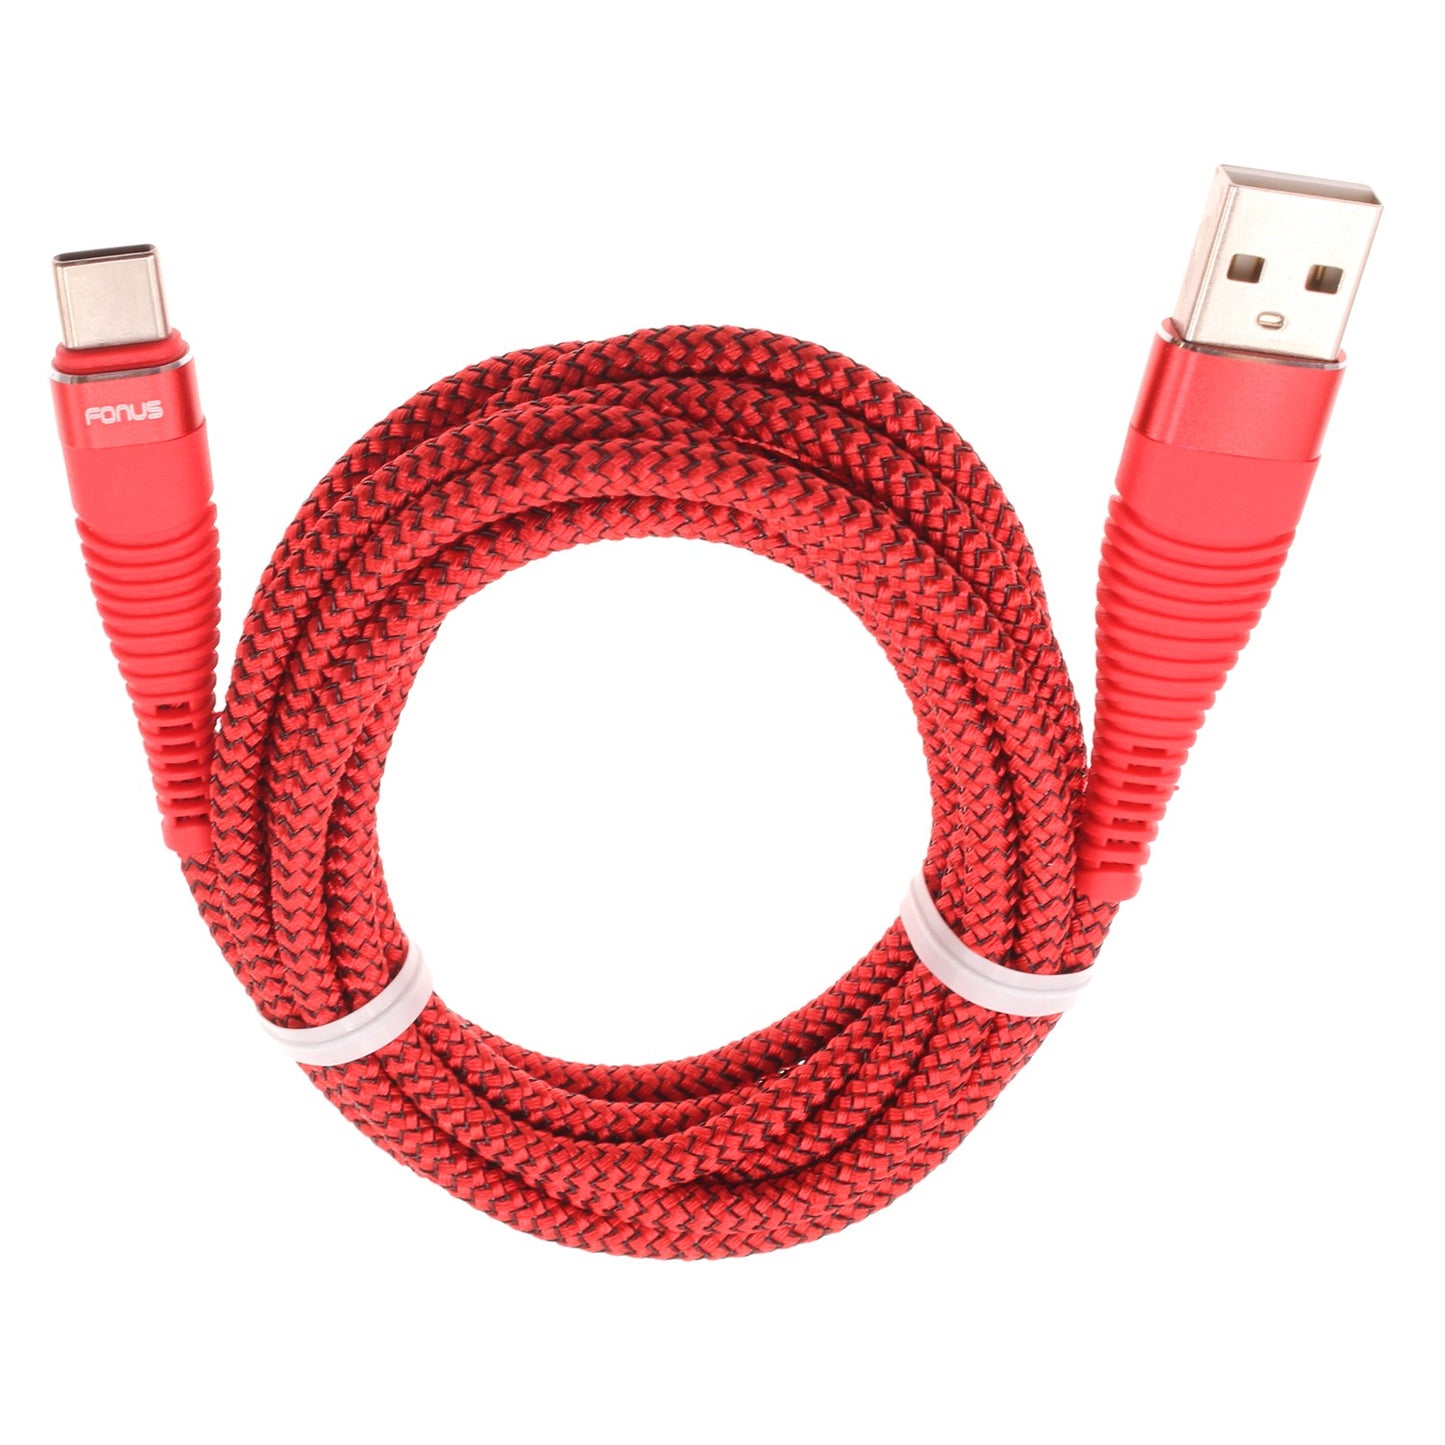  6ft and 10ft Long USB-C Cables   Fast Charge   TYPE-C Cord   Power Wire   Data Sync   Red Braided   - ONJ21+J53 1995-2